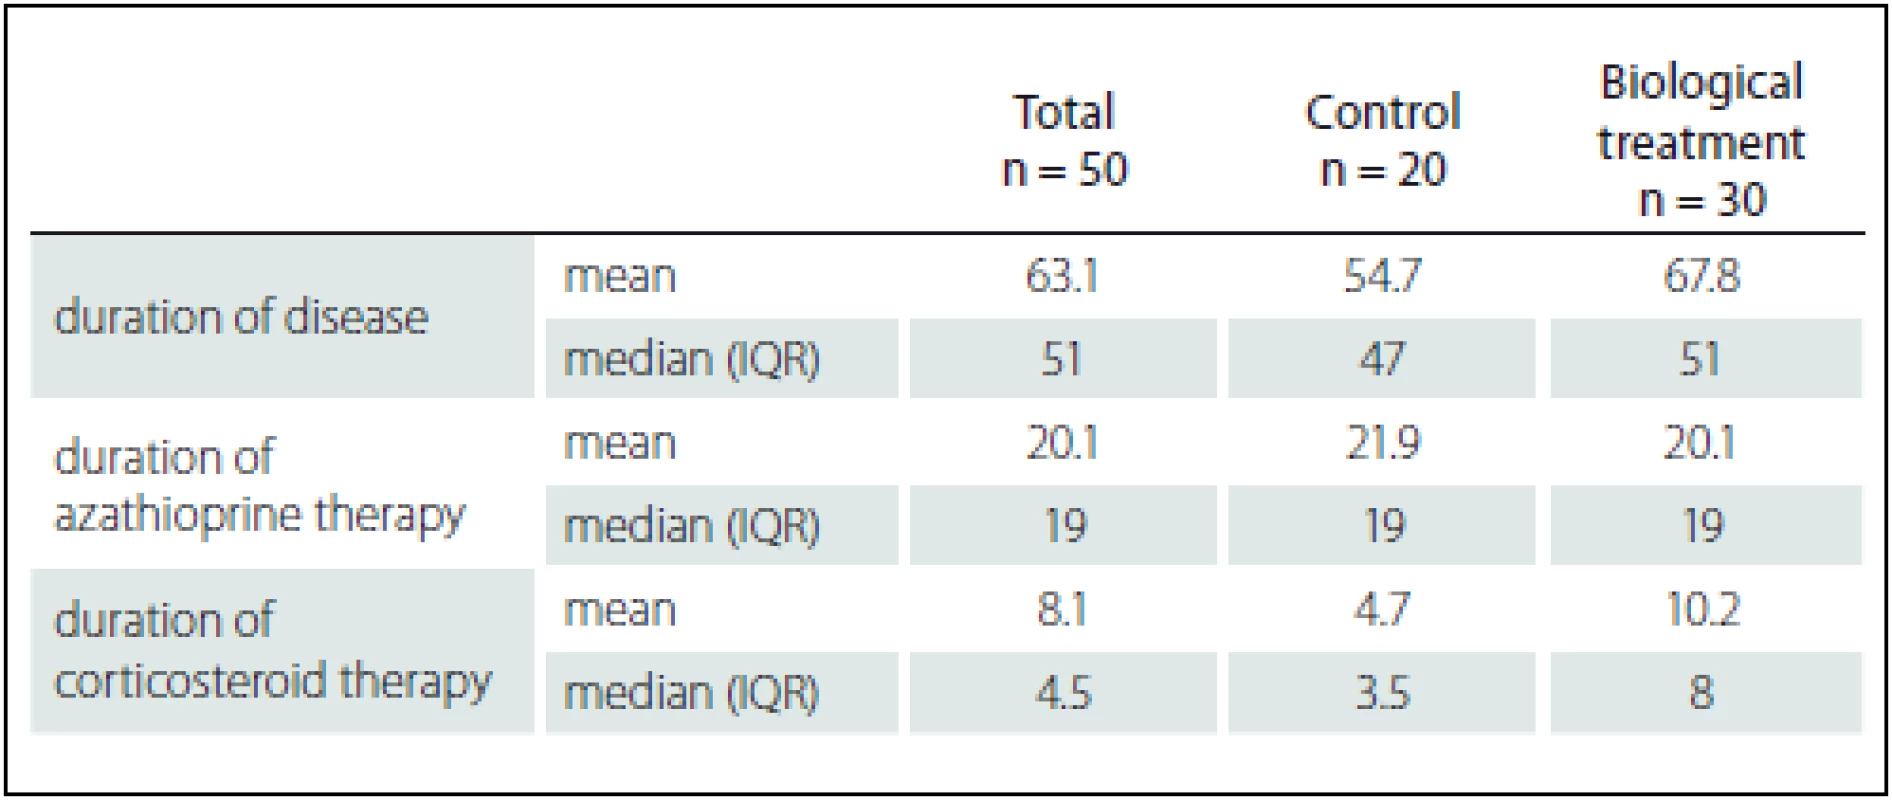 Comparison of study groups according to duration of disease and previous therapy (azathioprine, corticosteroids).